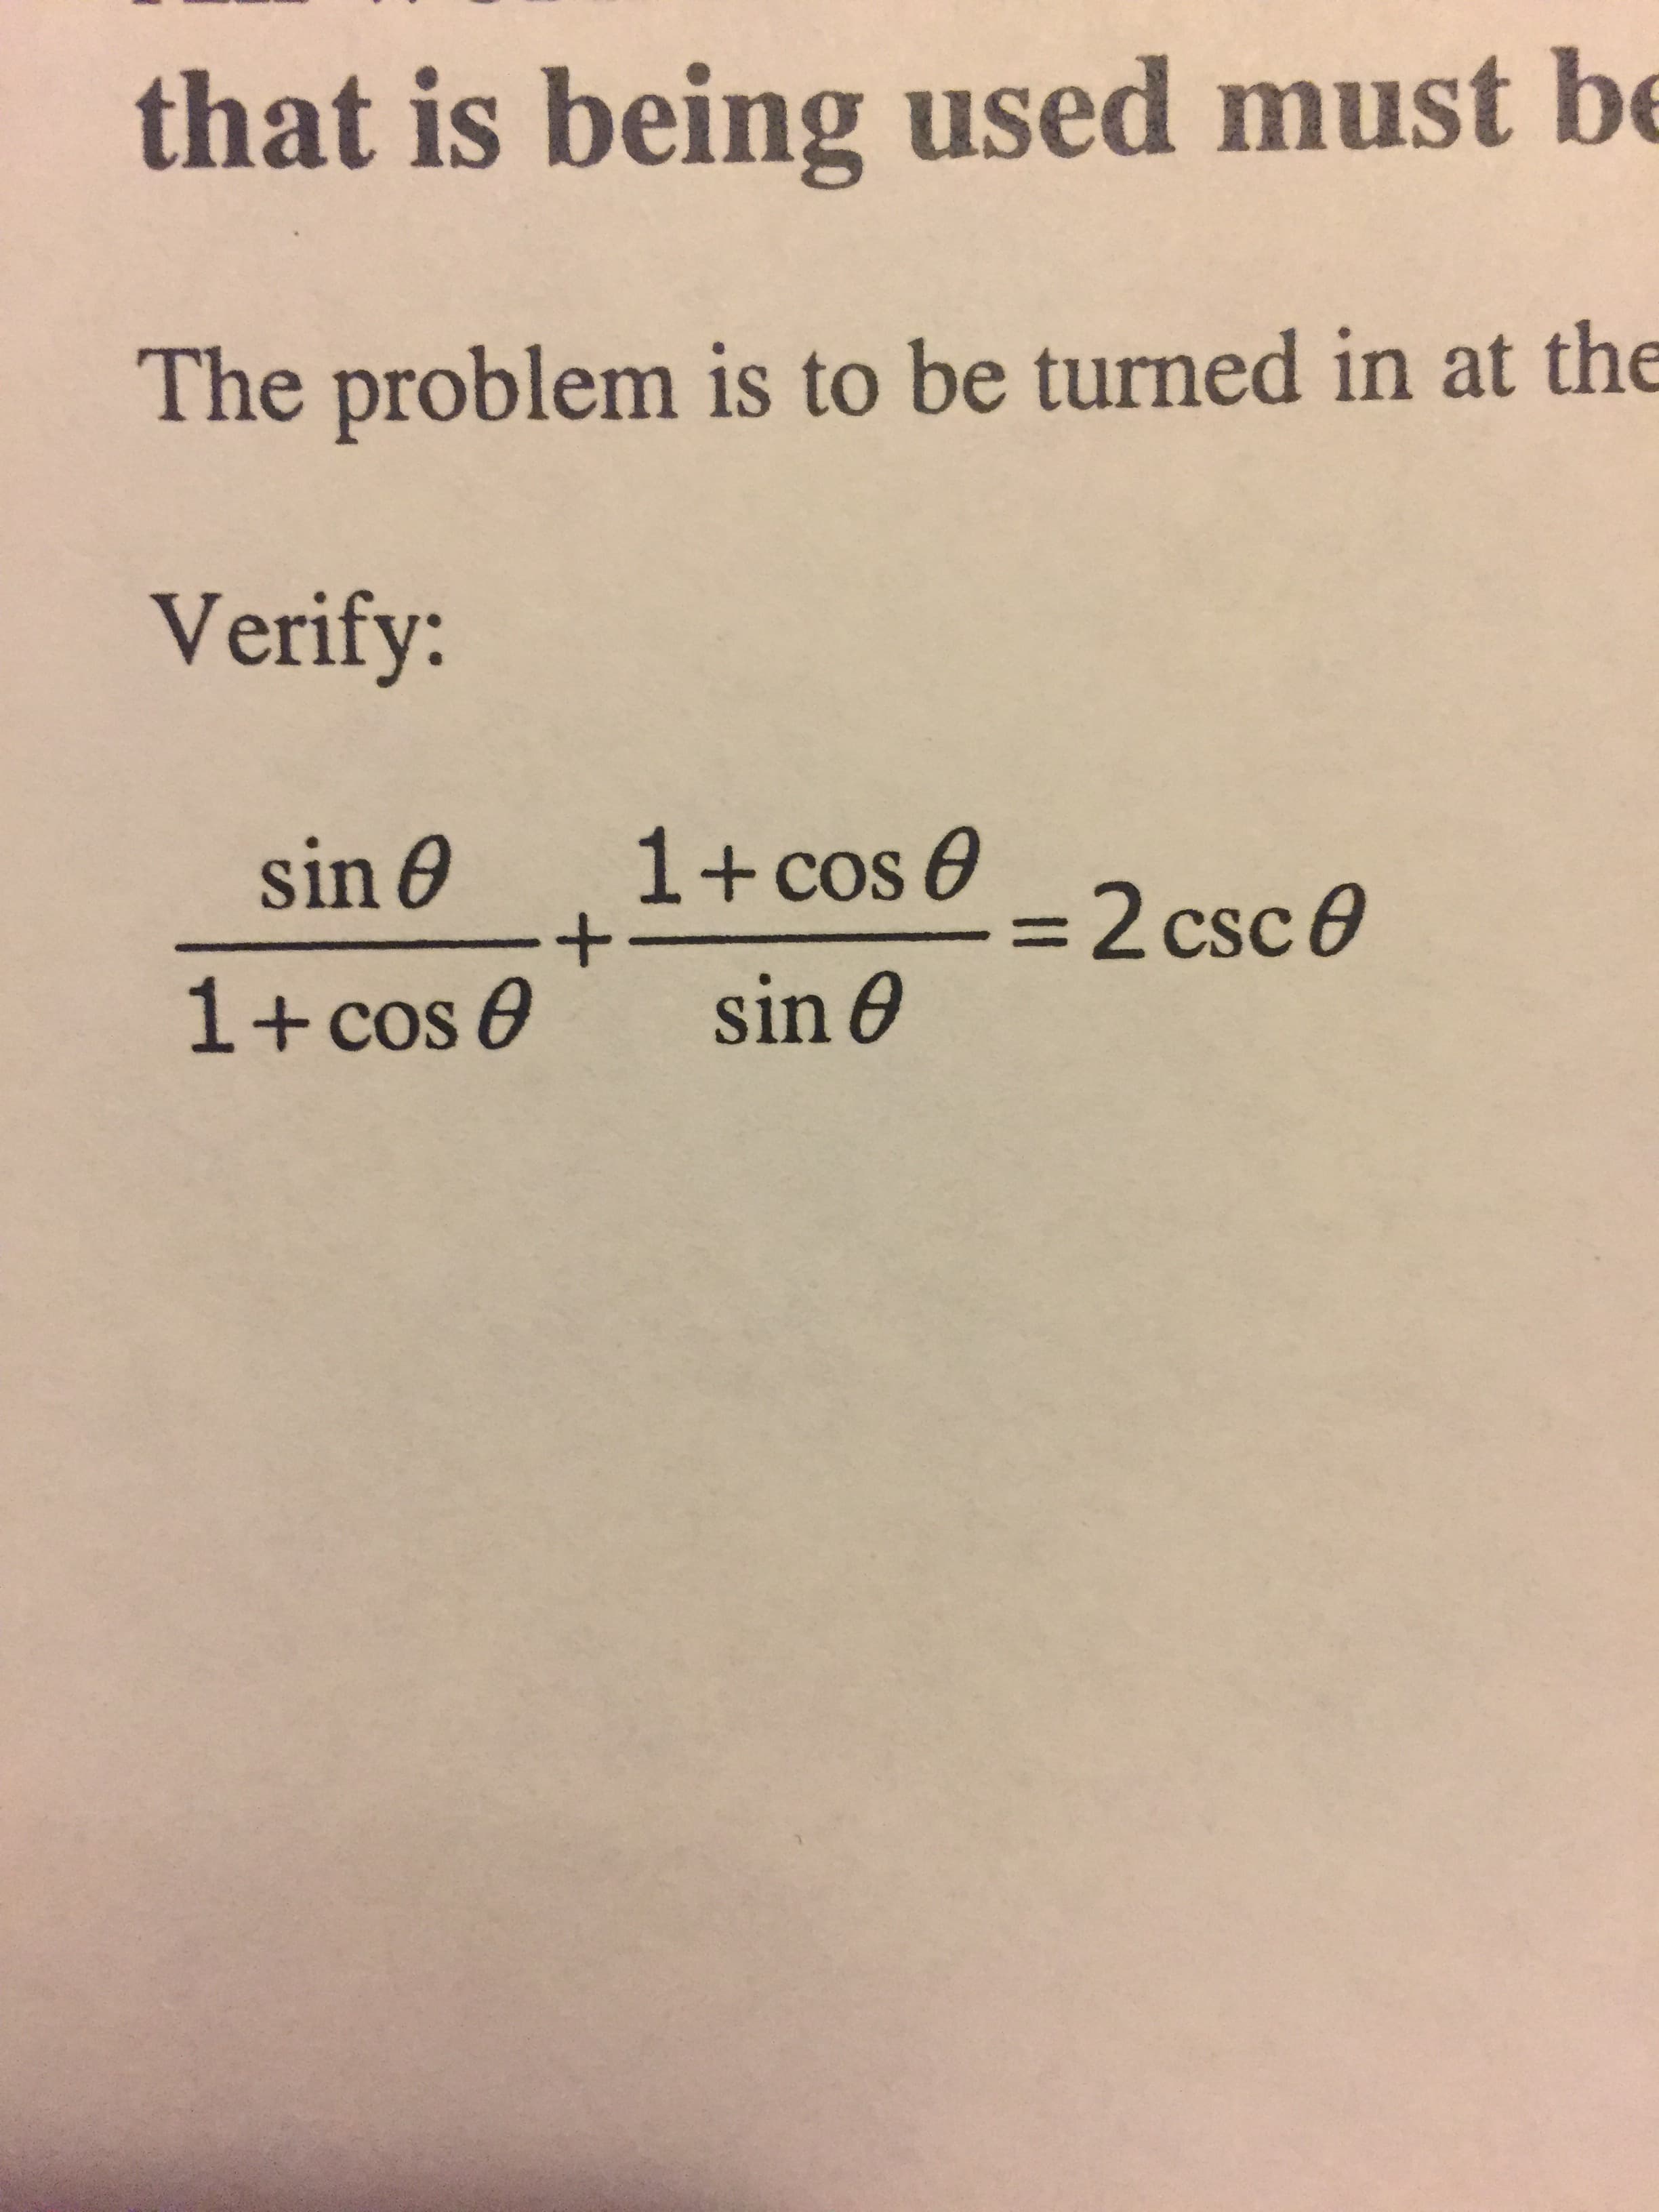 used mustbe
that is being
The problem is to be turned in at the
Verify:
1+cos &
+
sin e
sin e
=2 csc e
1+cos e
